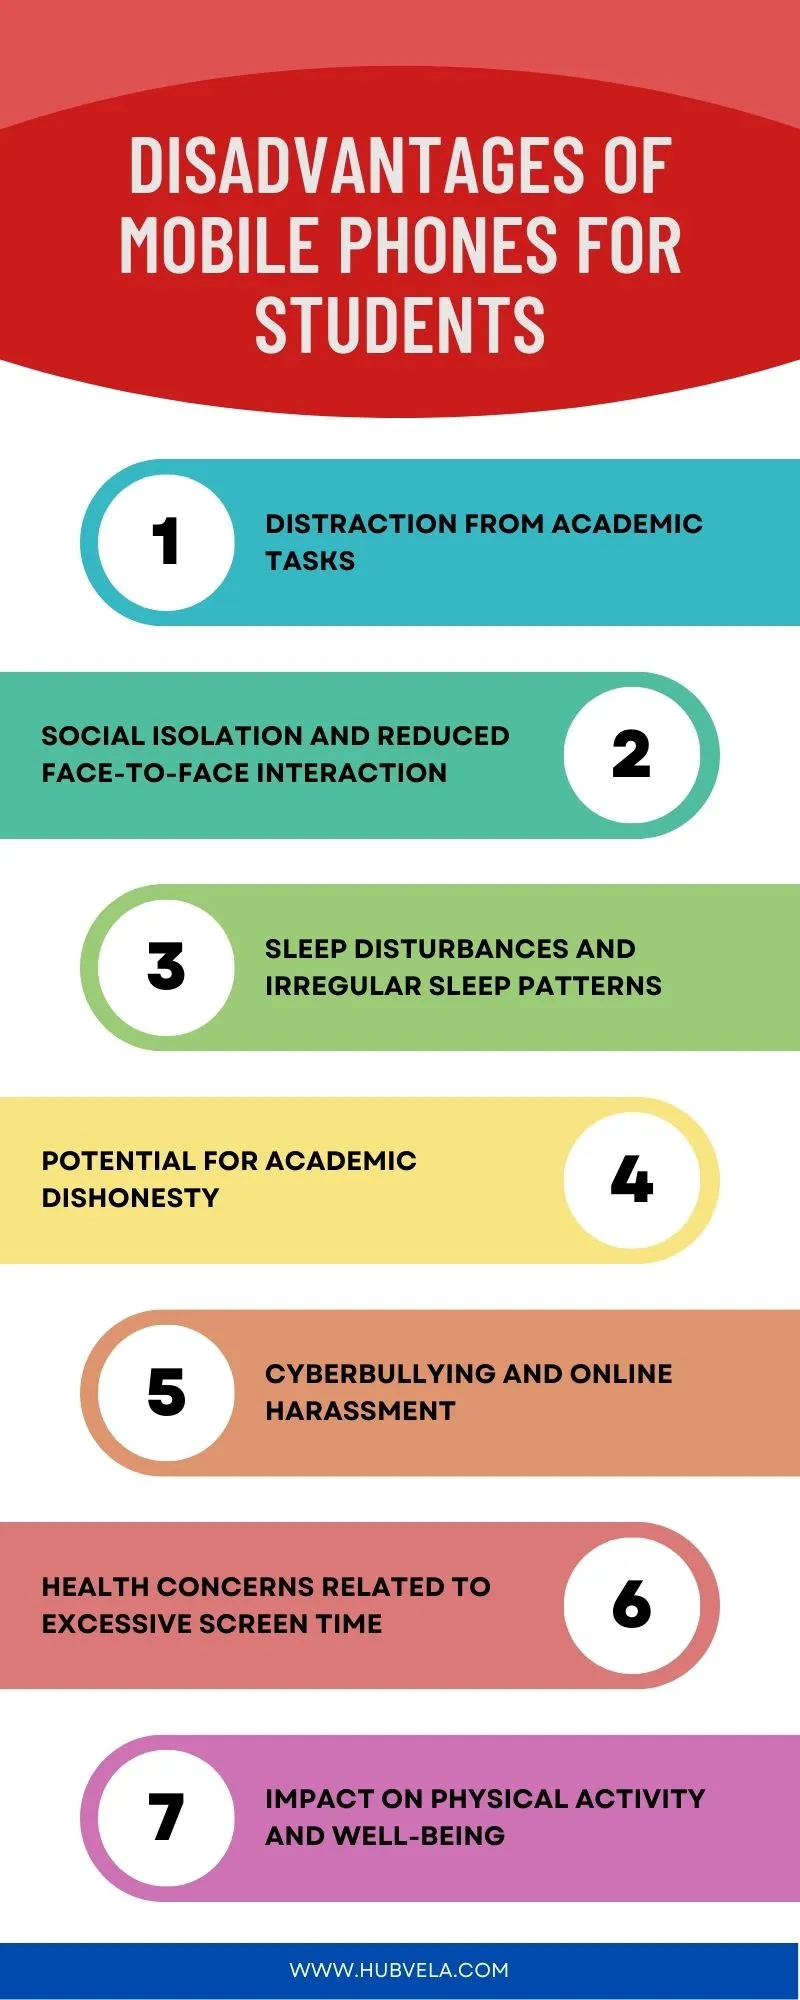 Disadvantages of Mobile Phones for Students Infographic